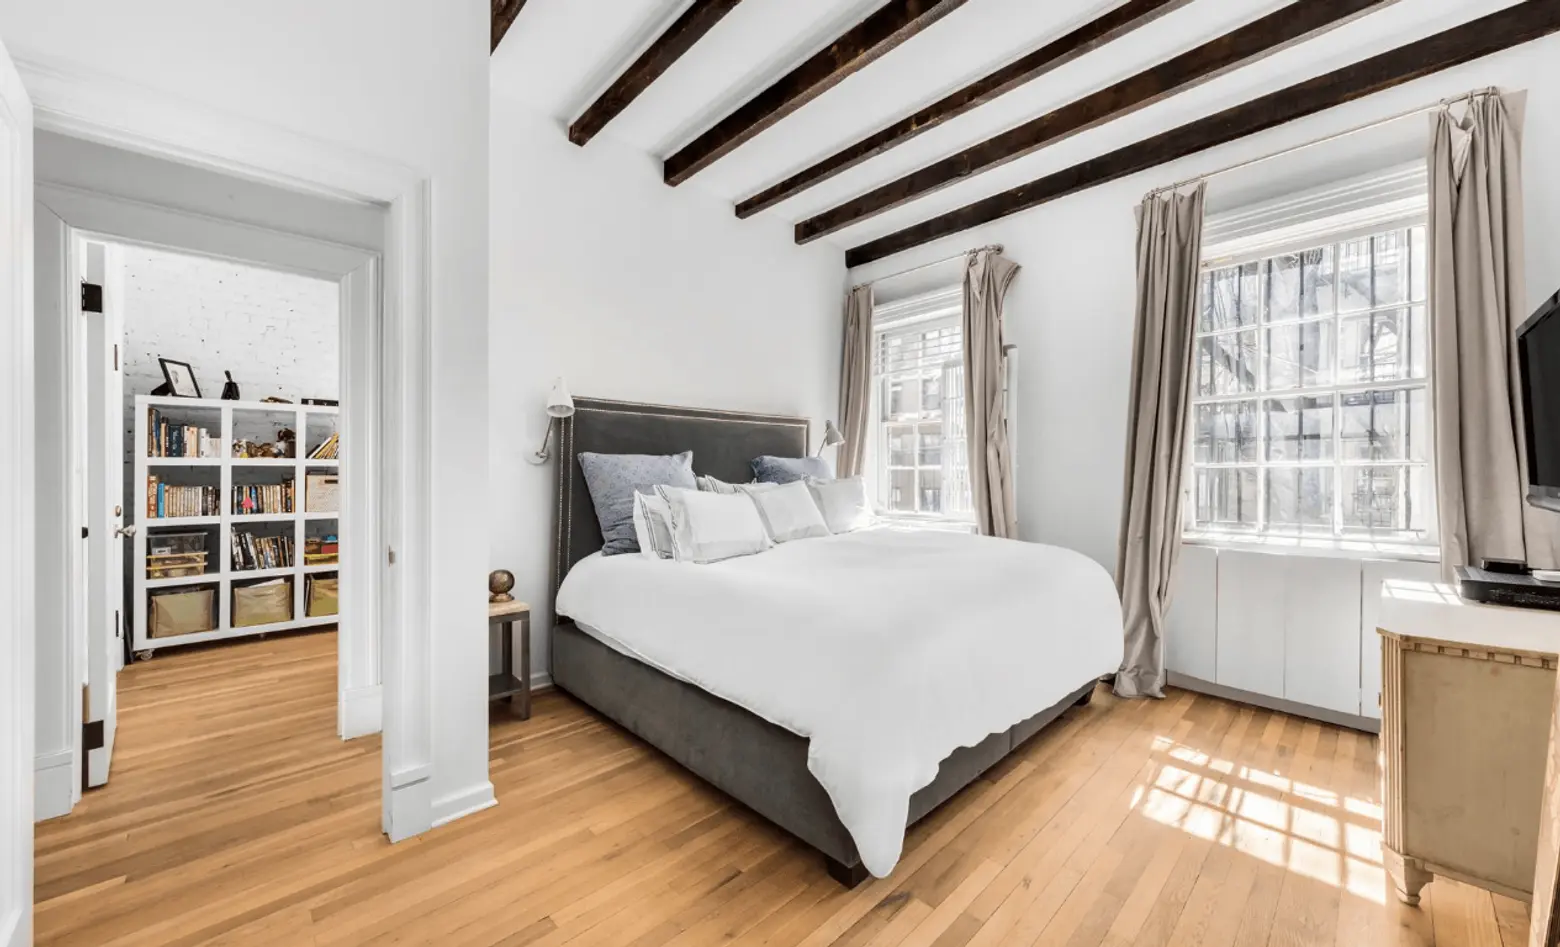 68 West 11th Street, cool listings, Greenwich Village, co-ops